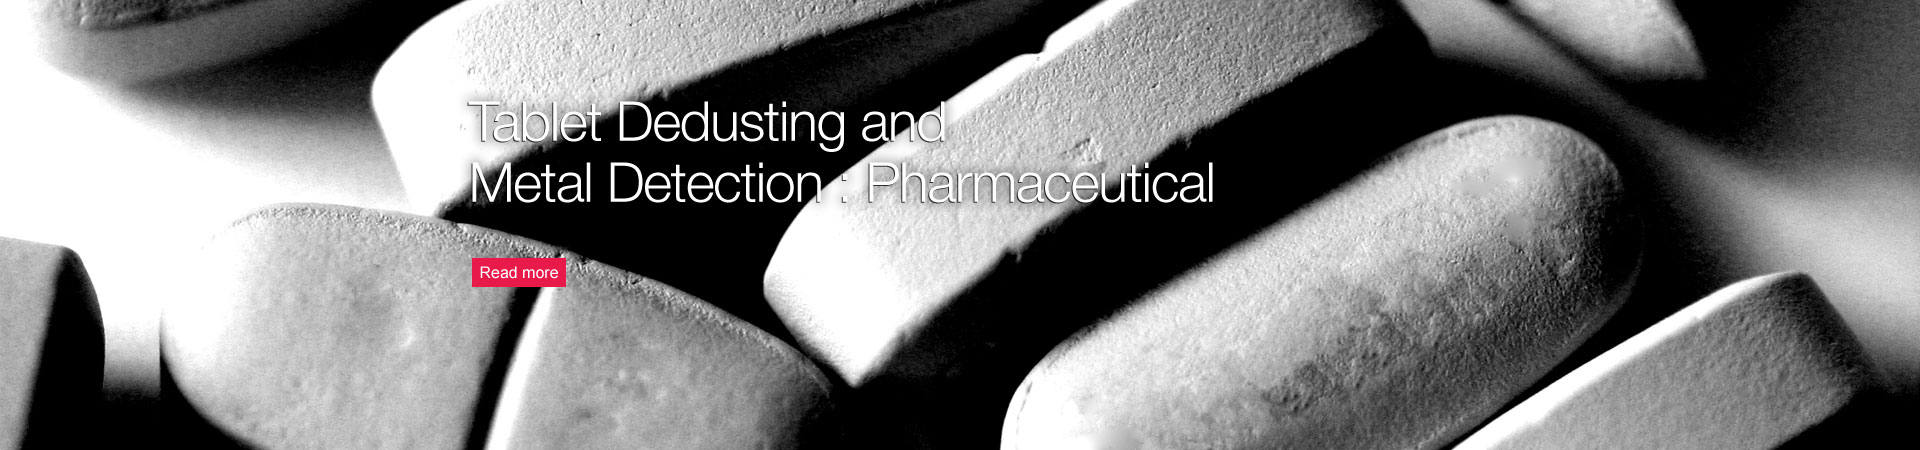 Tablet Dedusting and Metal Detection: Pharmaceutical 